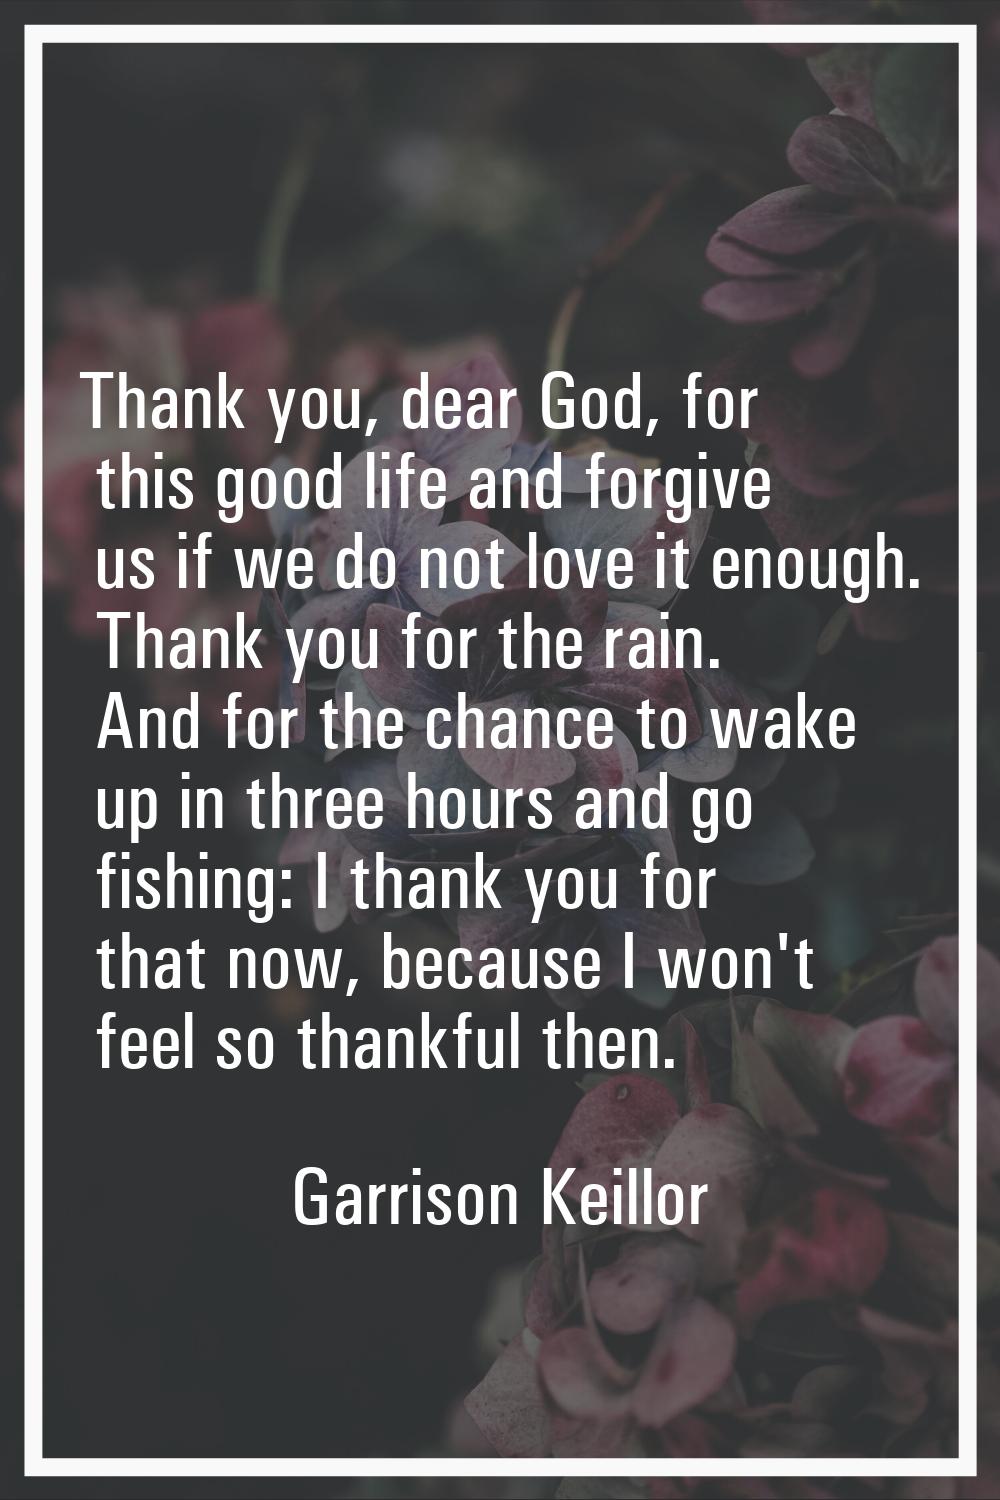 Thank you, dear God, for this good life and forgive us if we do not love it enough. Thank you for t